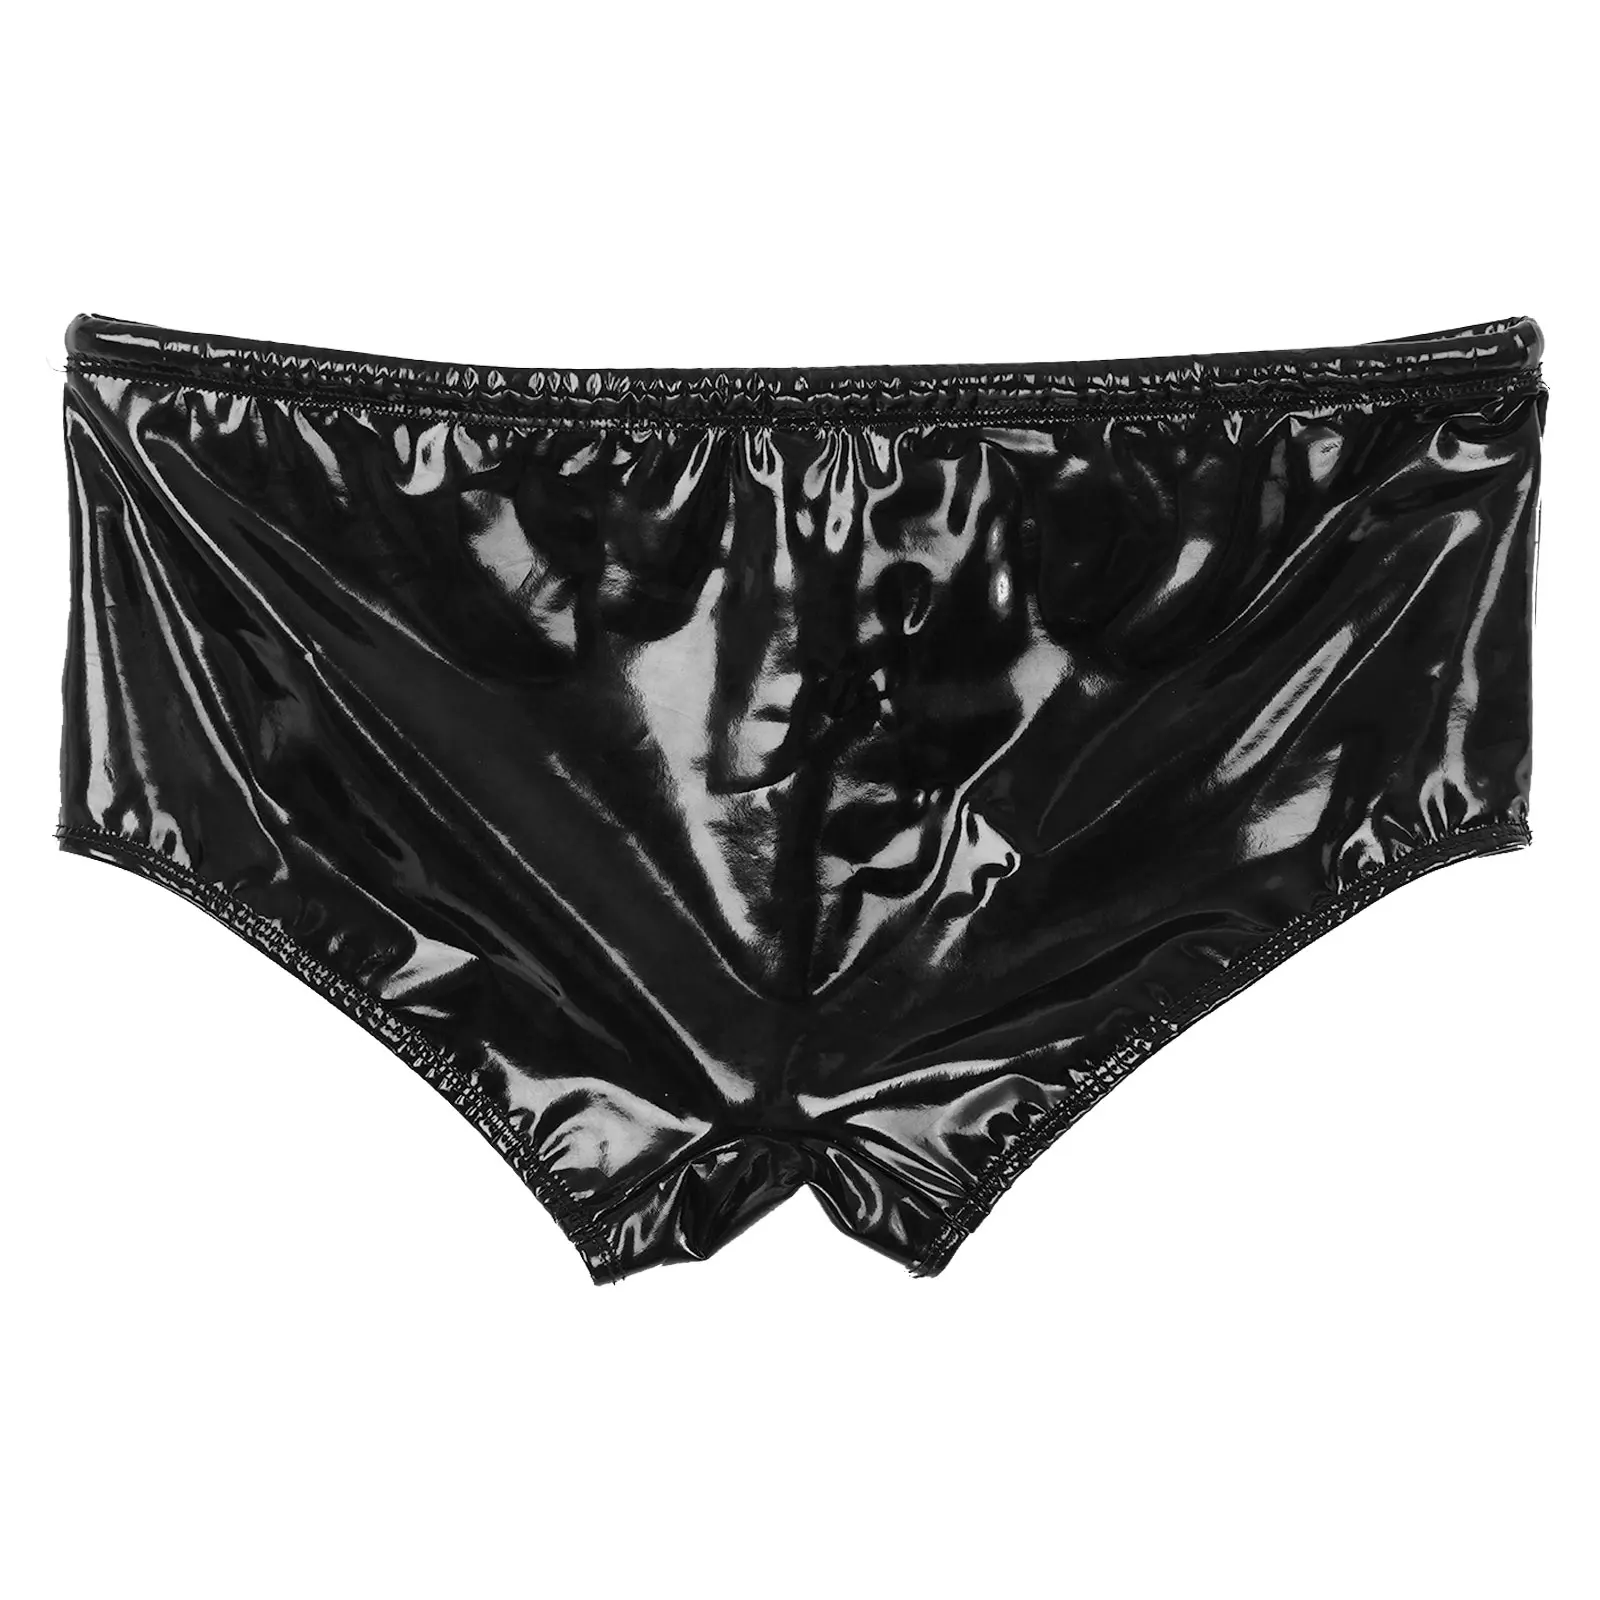 Mens Panties Wet Look Shiny Patent Leather Swimming Trunks Low Rise Bulge Pouch Briefs Drawstring Boxer Shorts Swimwear Clubwear